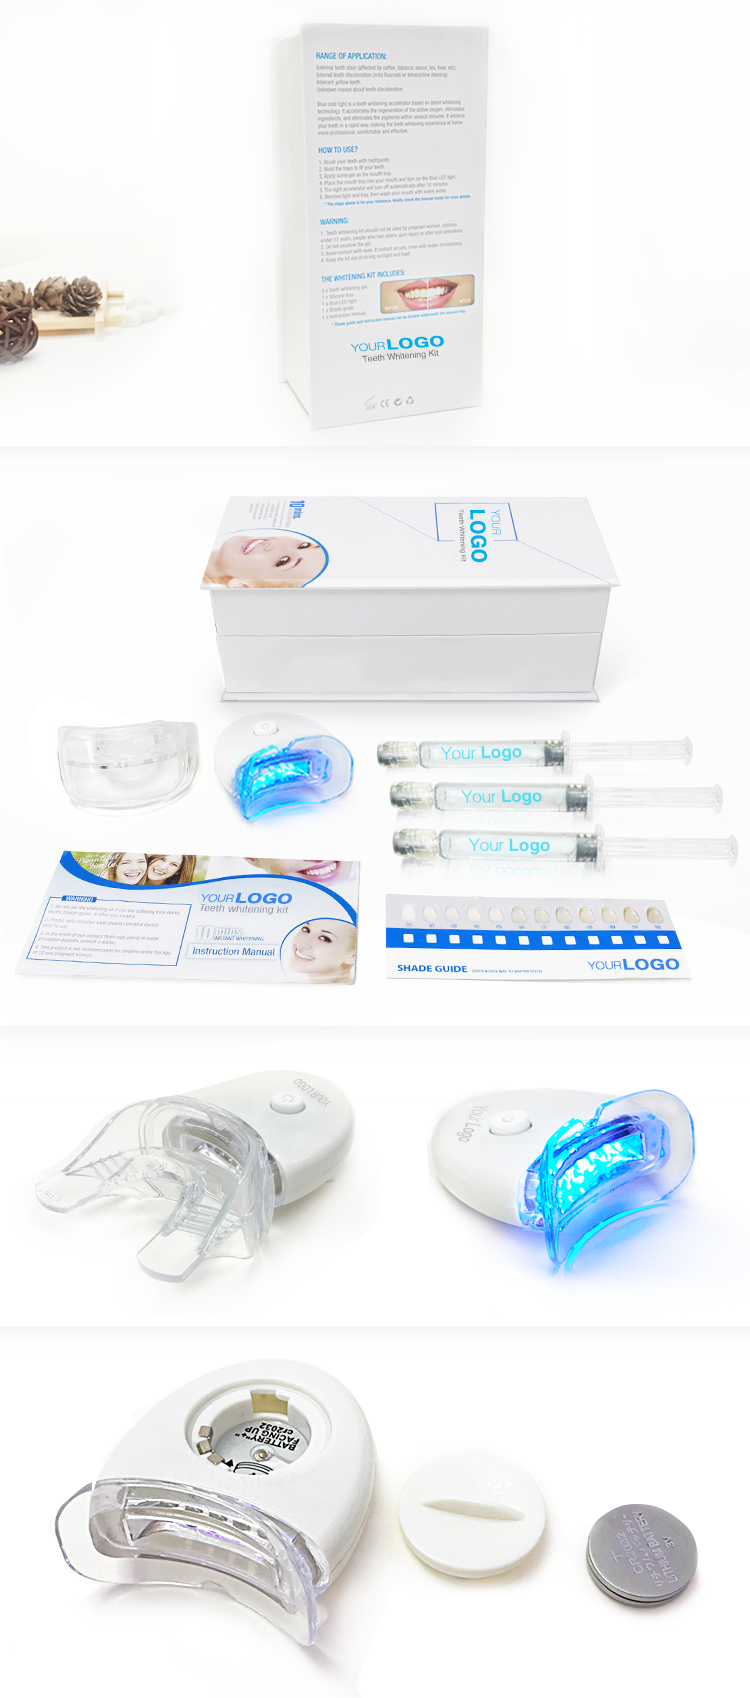 Private Label Teeth Whitening Manufacturer